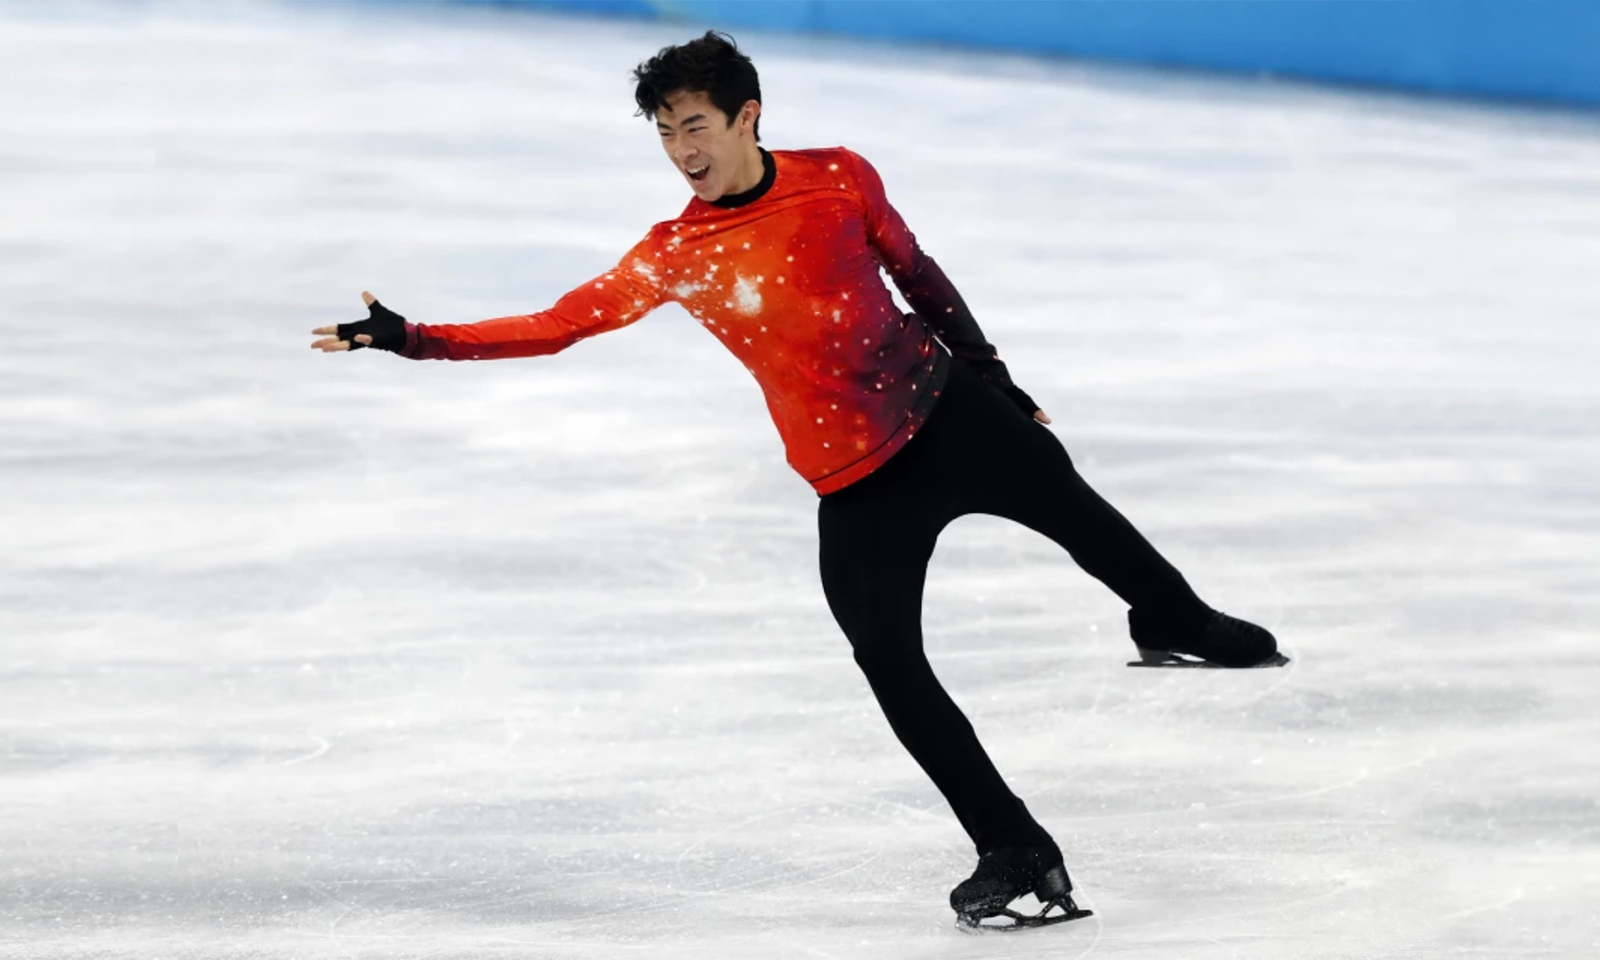 Nathan Chen fulfills his Olympic dream by winning figure skating gold